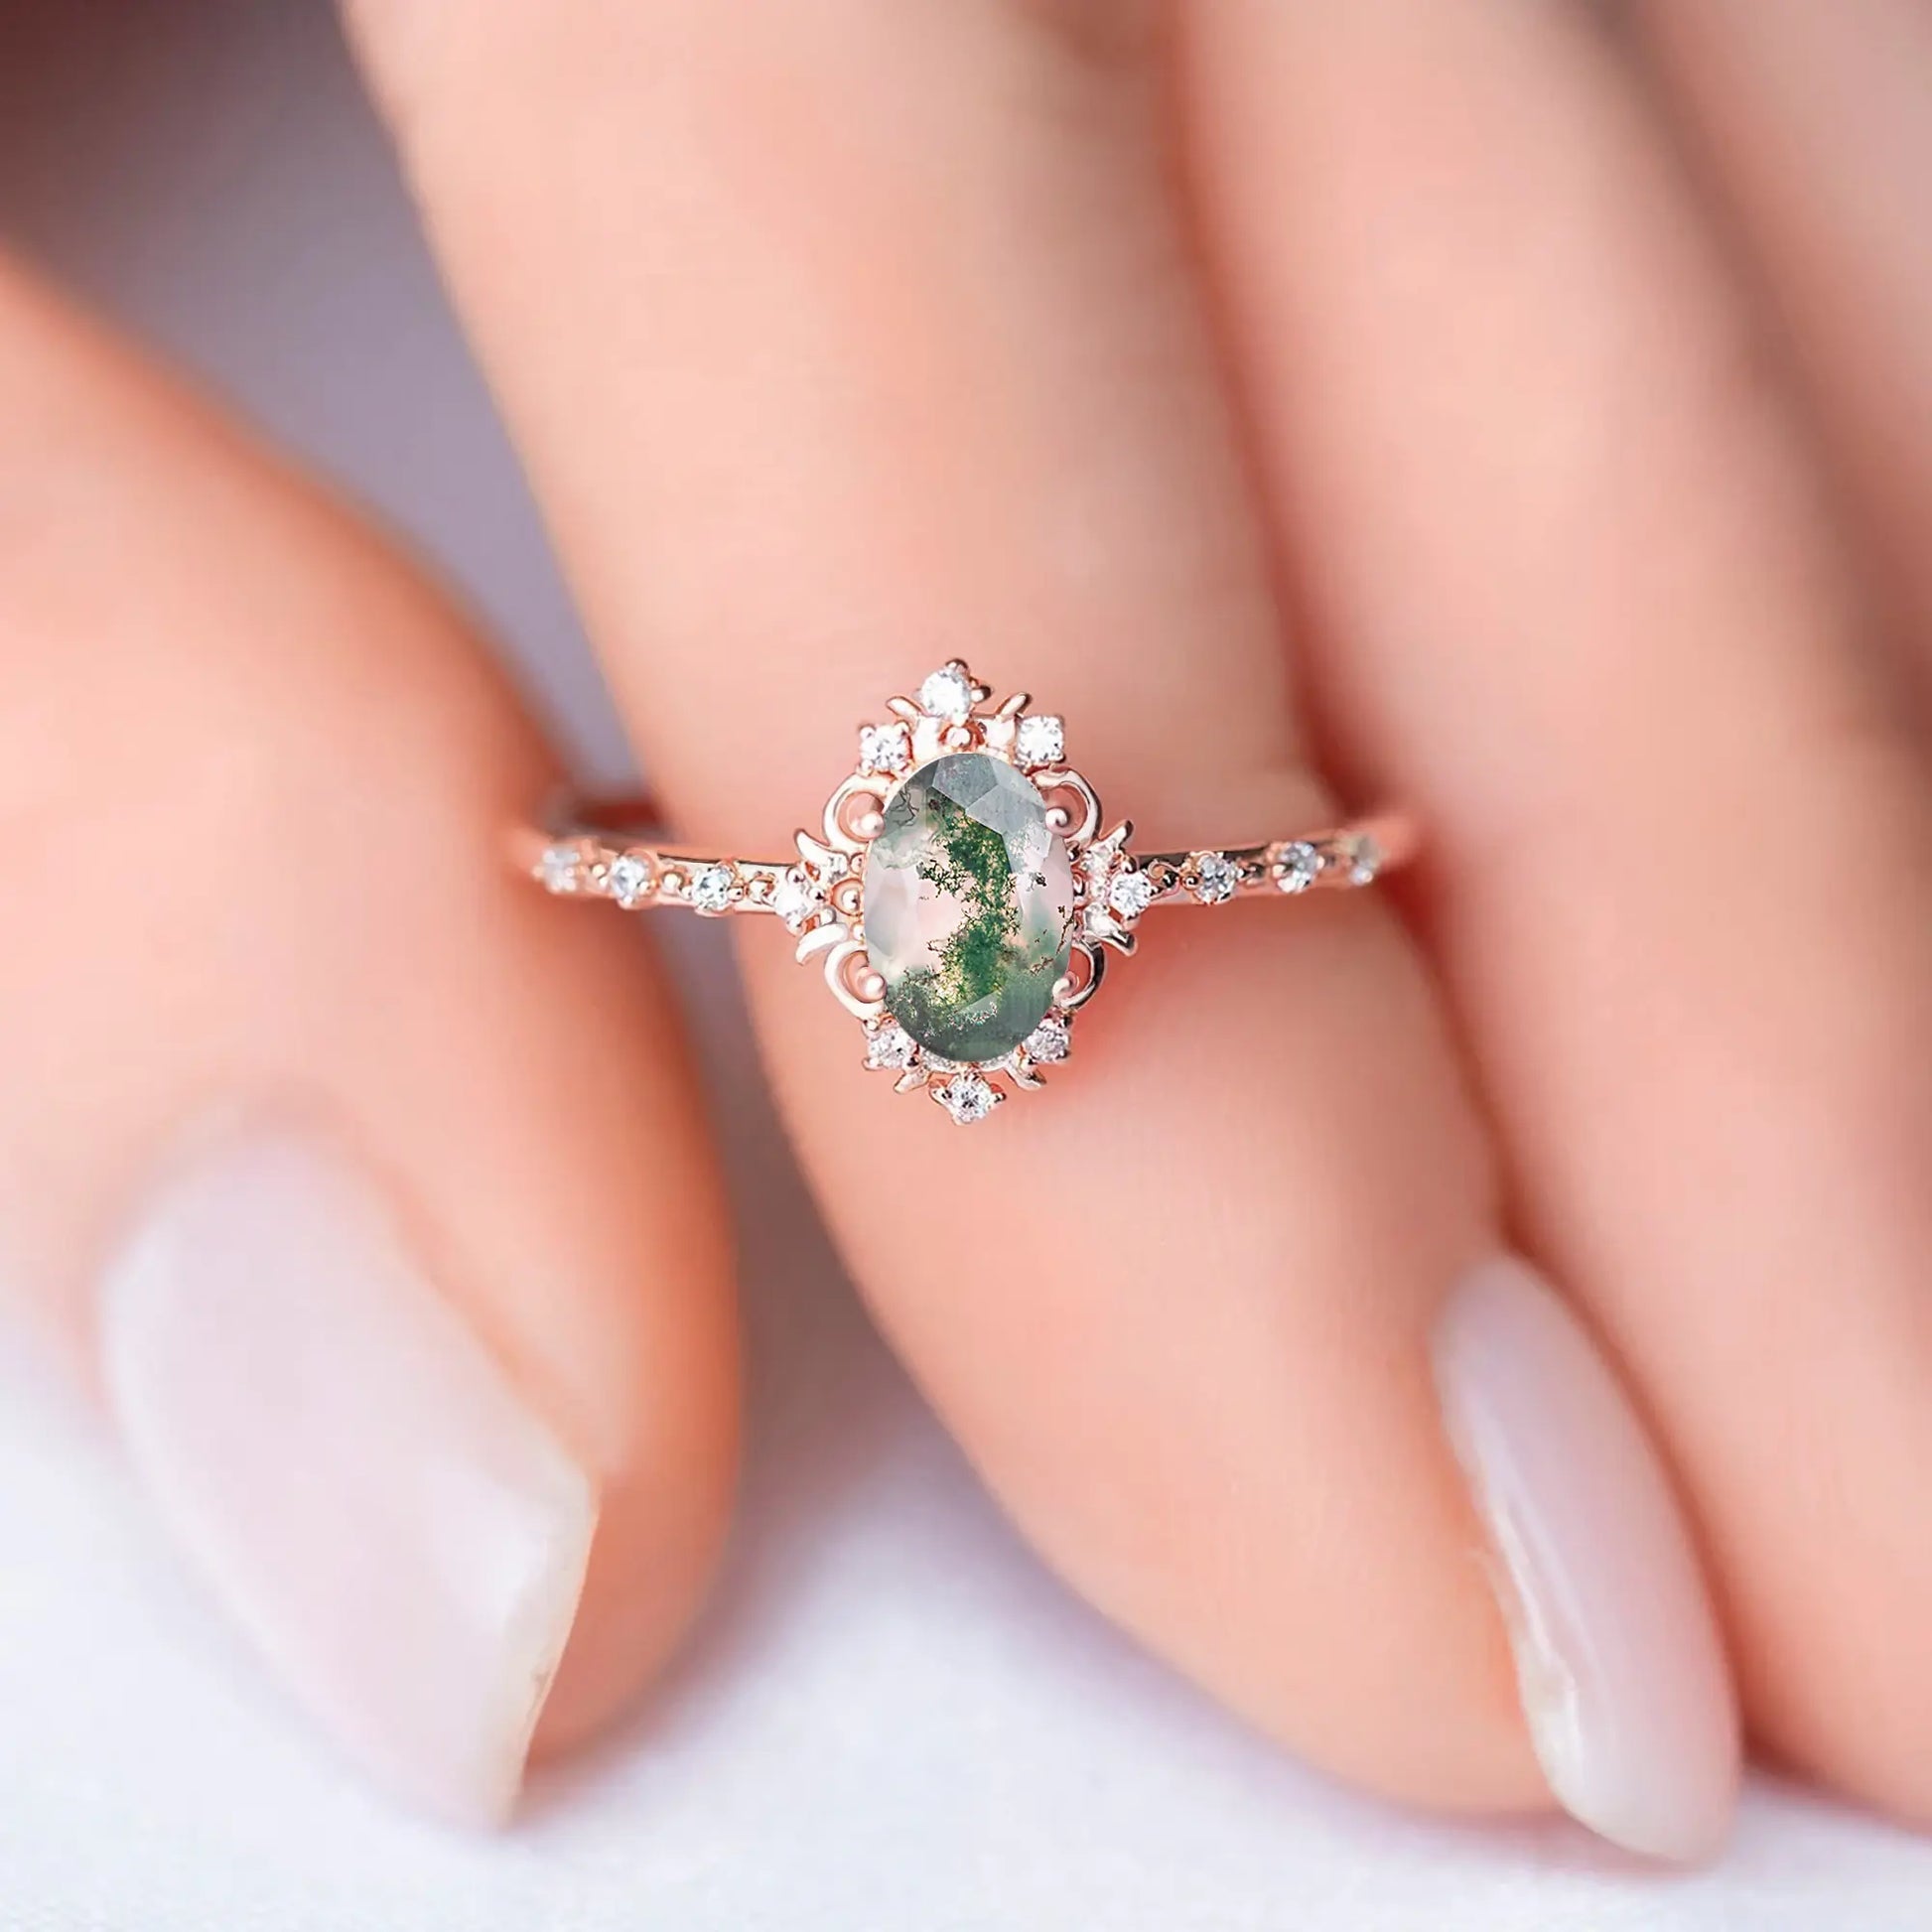 Vintage Moss Agate ring on a woman's finger